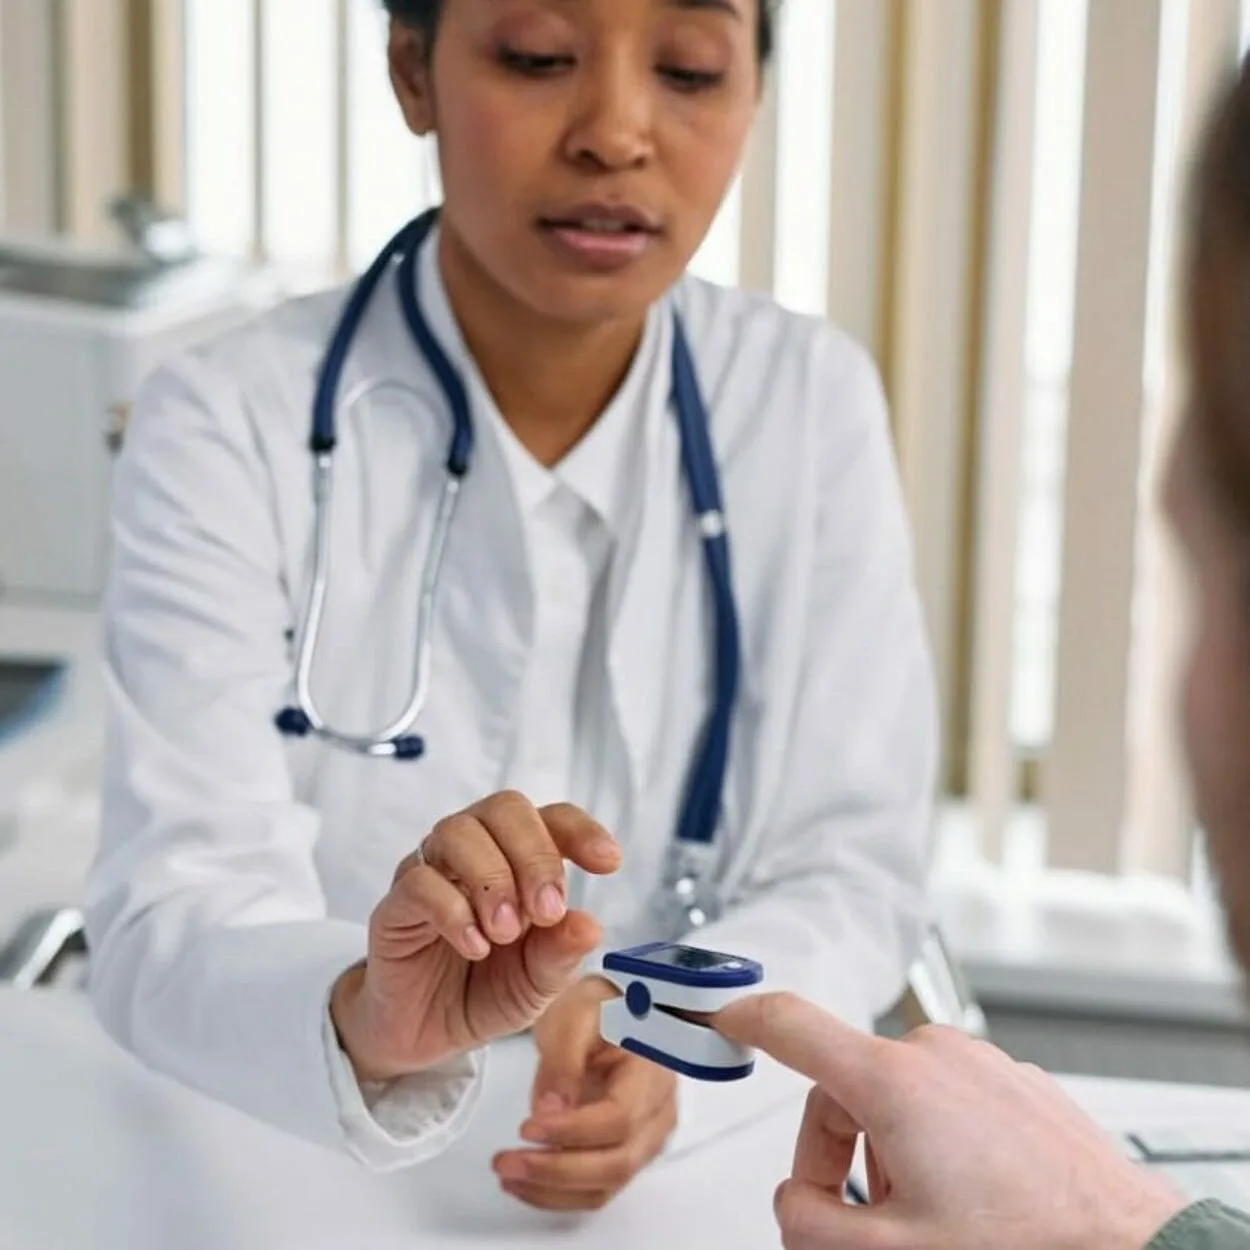 A doctor checking heartbeat of a patient